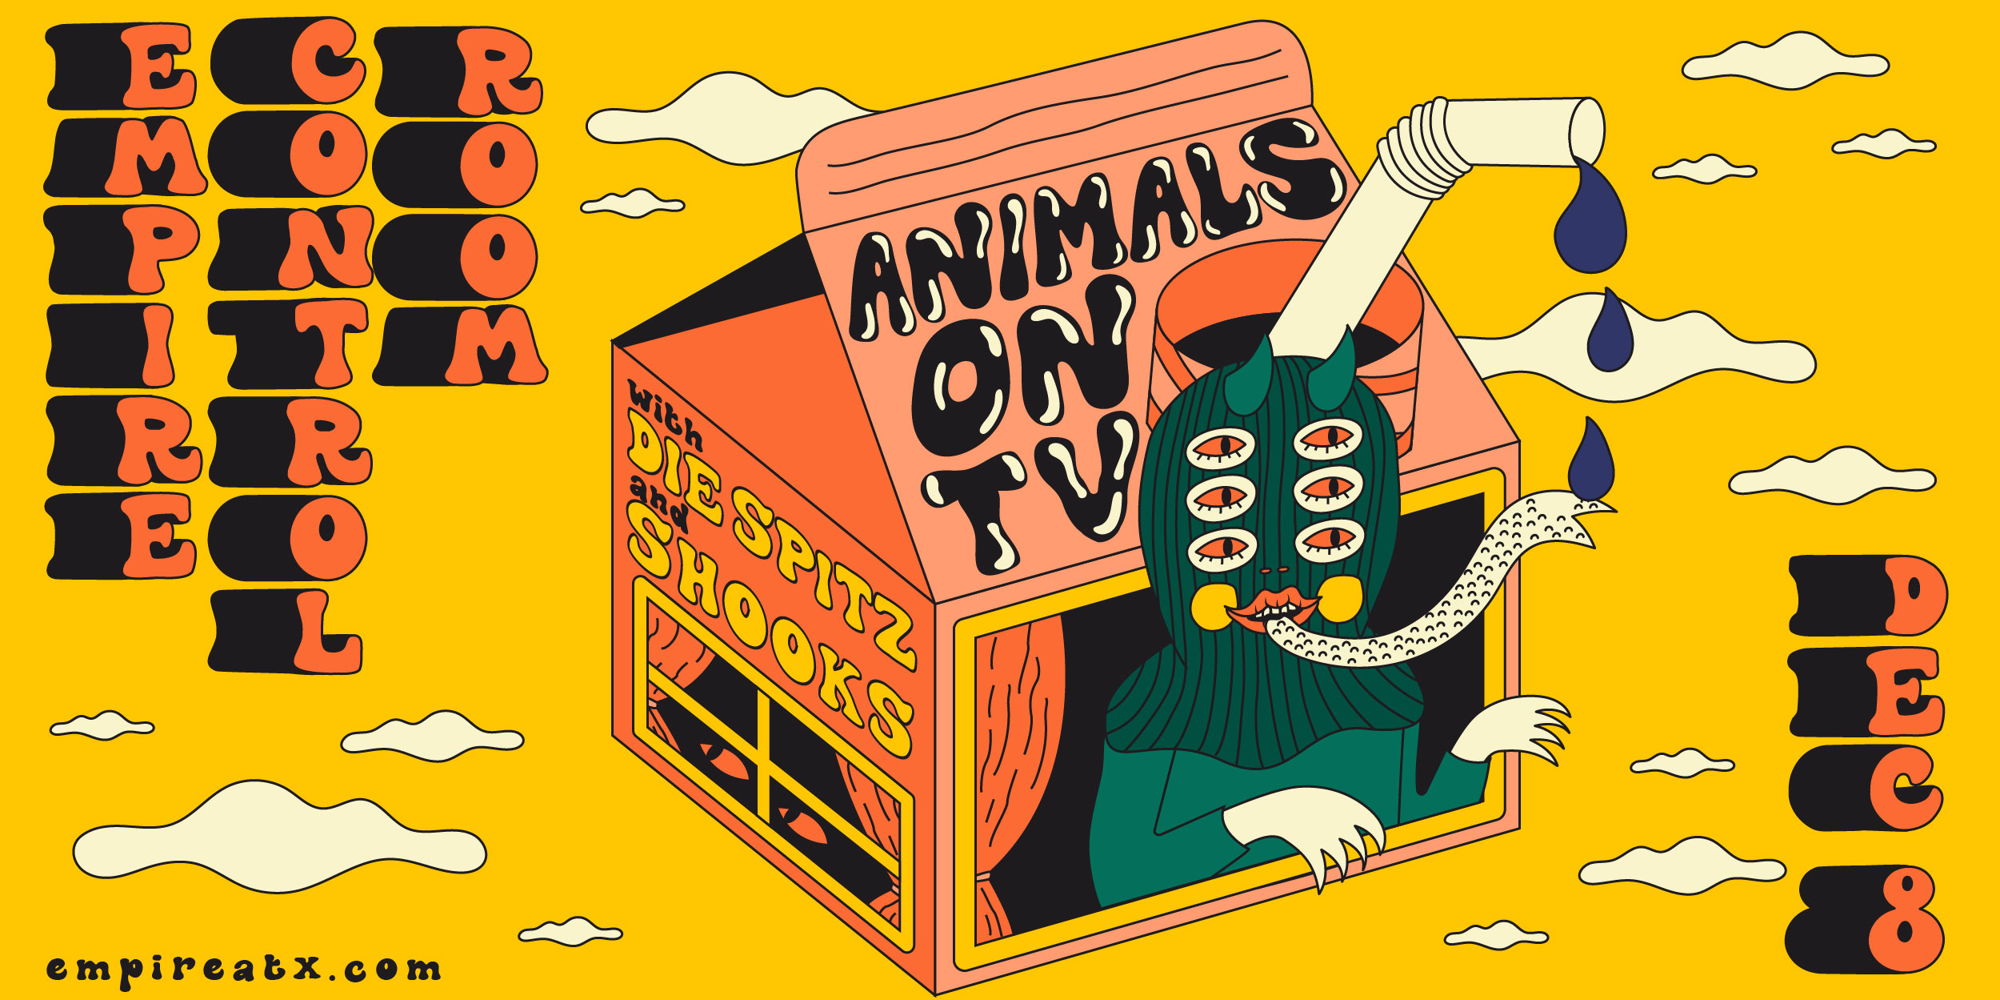  Empire Presents: Animals on TV w/ Die Spitz and Shooks promotional image